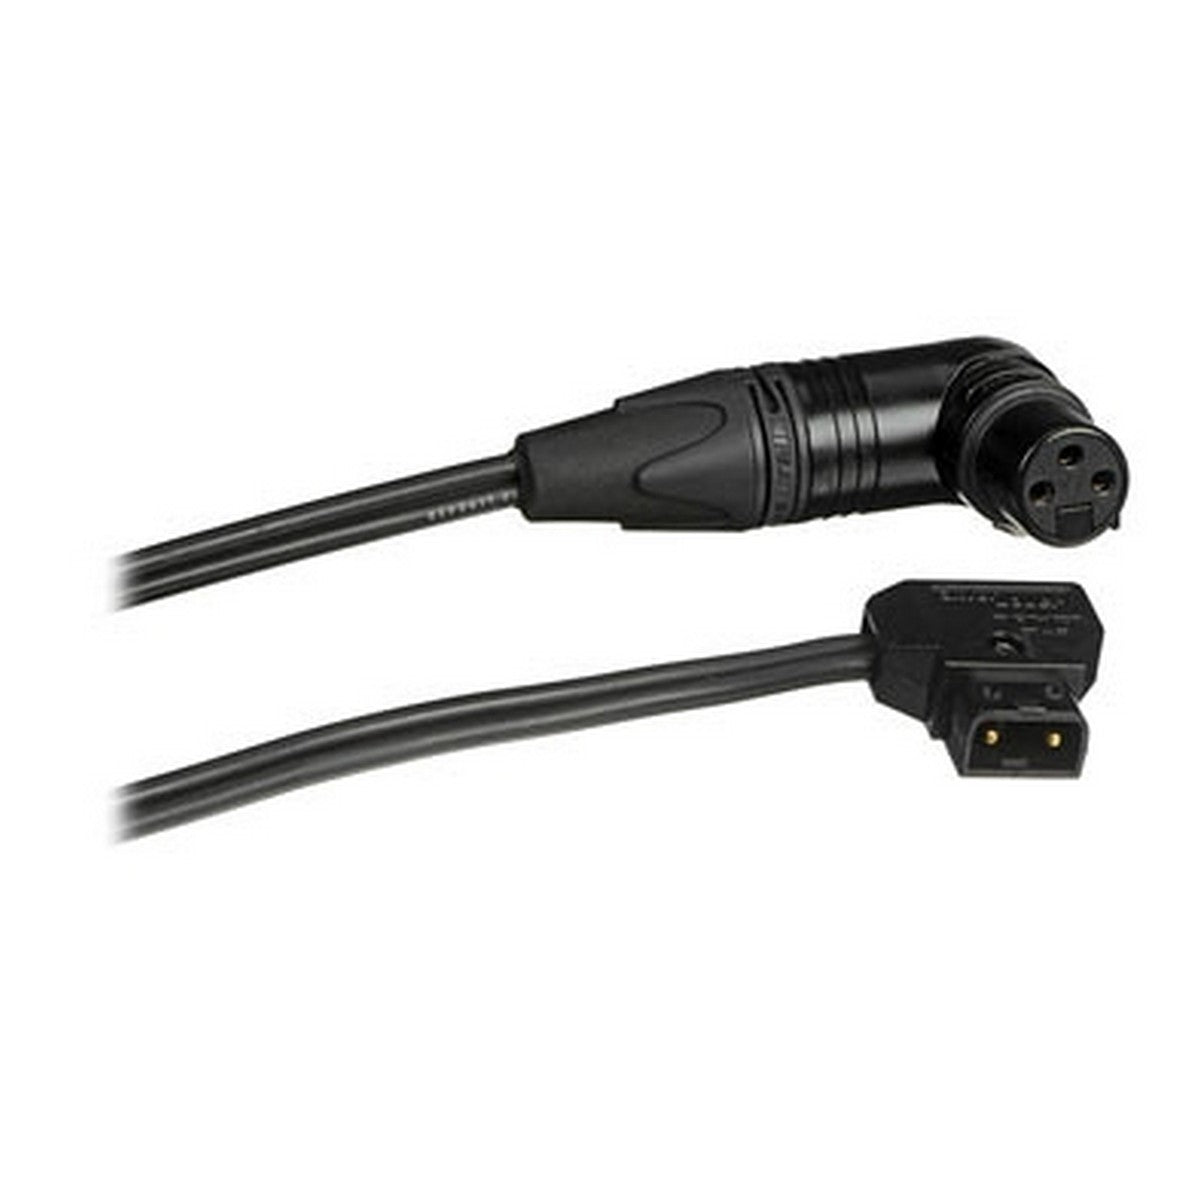 Litepanels P-Tap to 3 Pin XLR Cable | Cable for Astra 1x1 6 inch Fresnel 900-0024